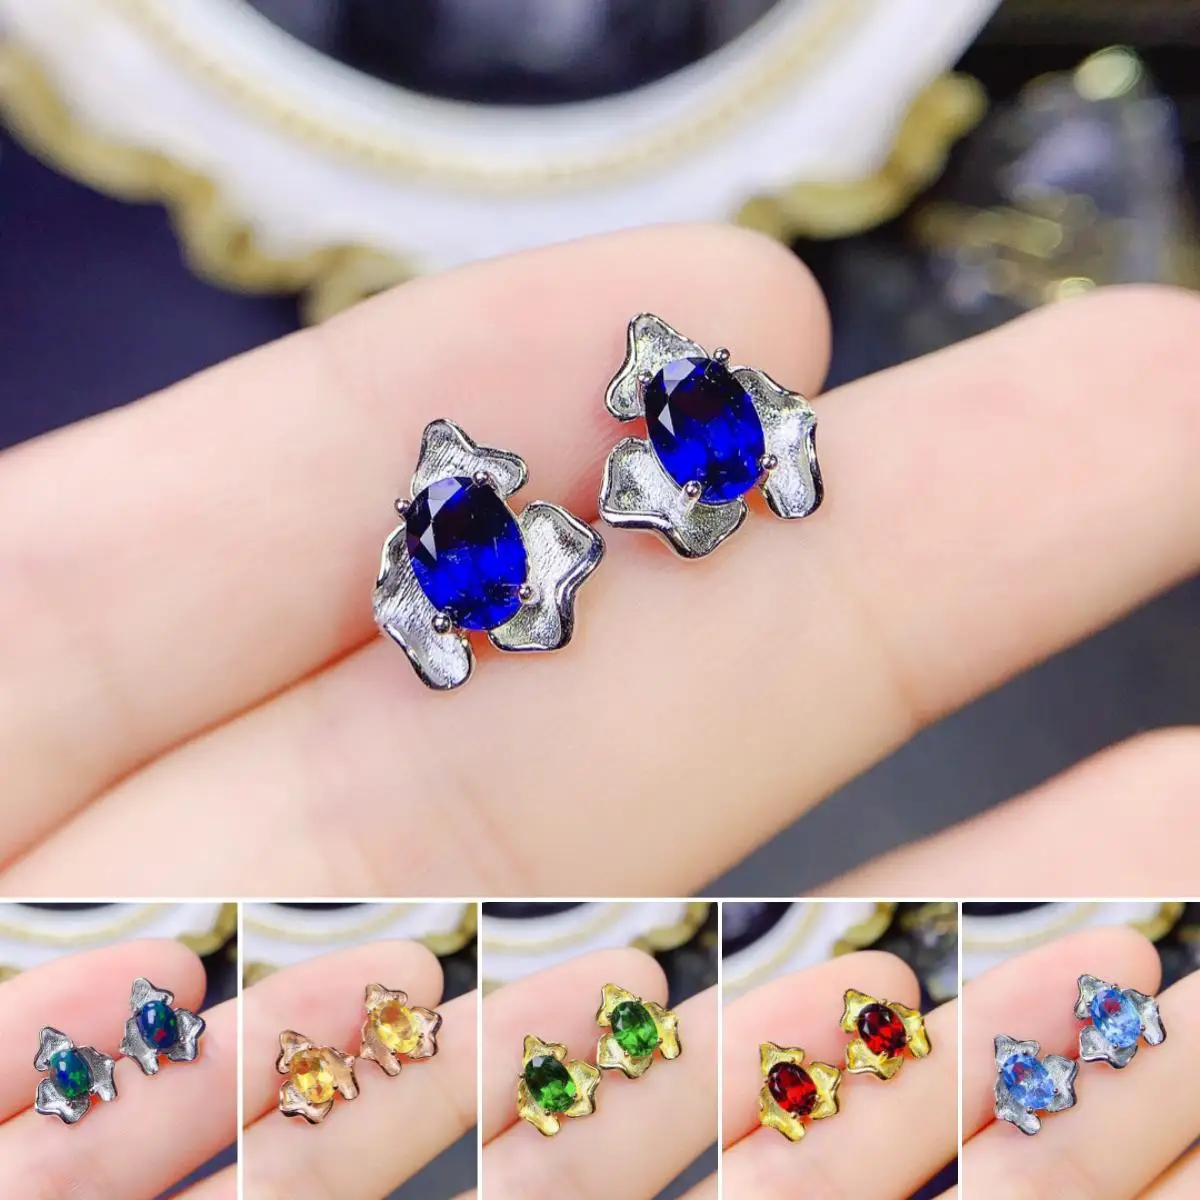 

FS 5*7 Natural Sapphire/Diopside/Opal/Citrine Fashion Earrings S925 Pure Silver Fine Charm Wedding Jewelry for Women MeiBaPJ New